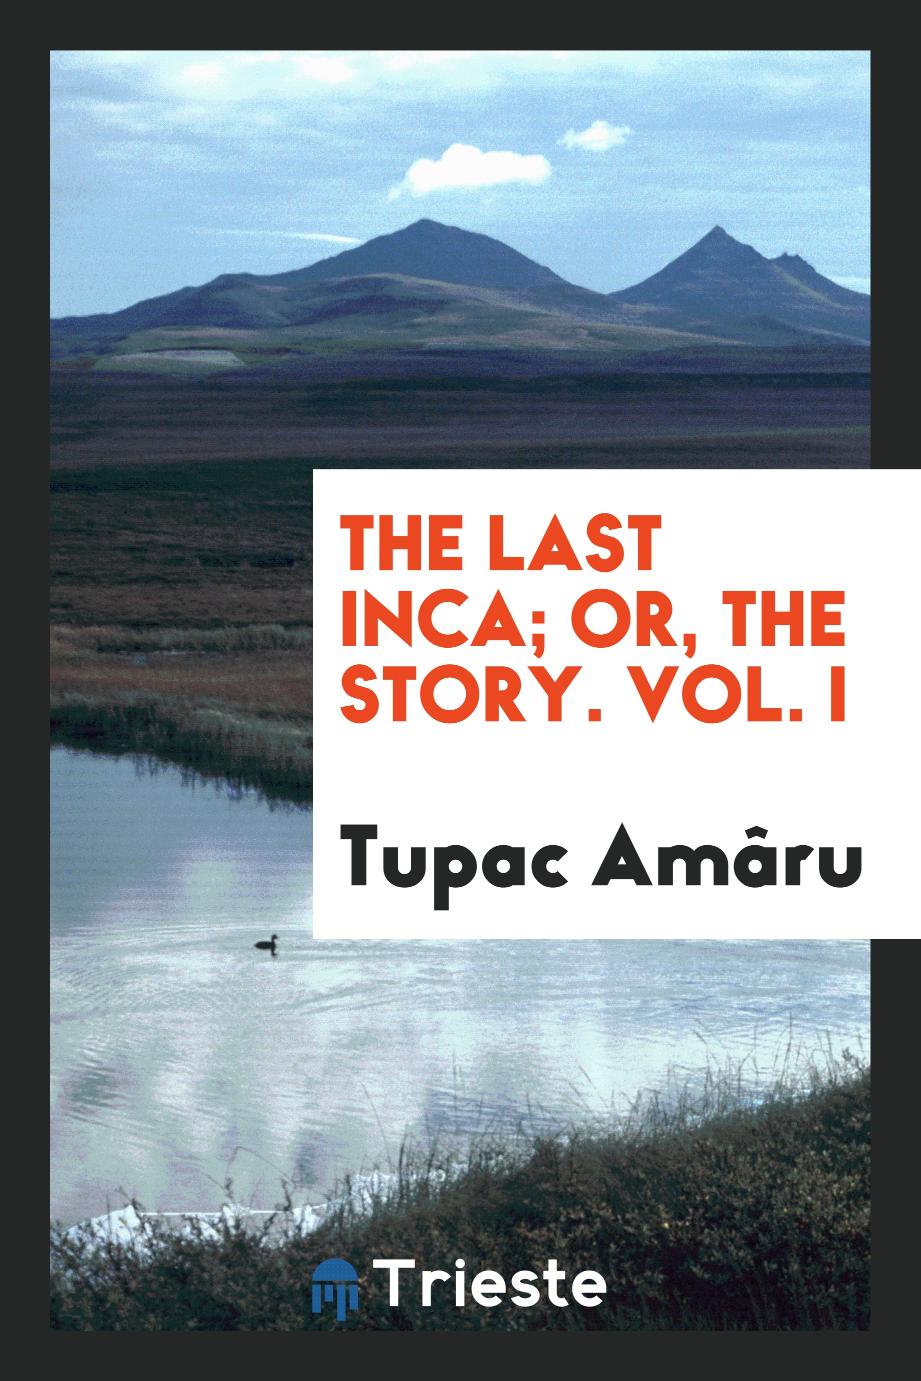 The Last Inca; Or, The Story. Vol. I